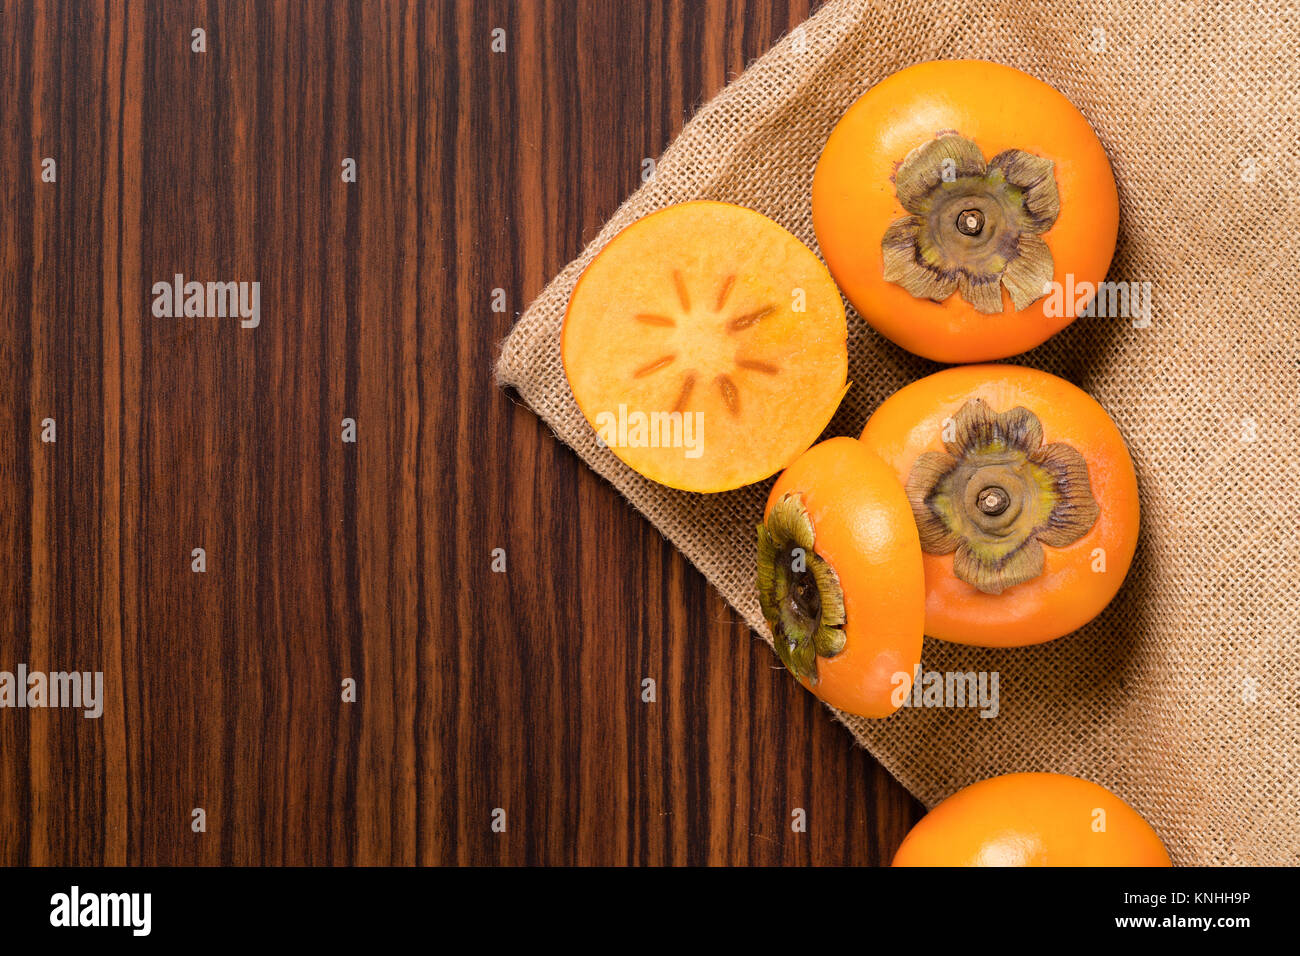 Persimmon fruit on rustic sack and wooden table Stock Photo